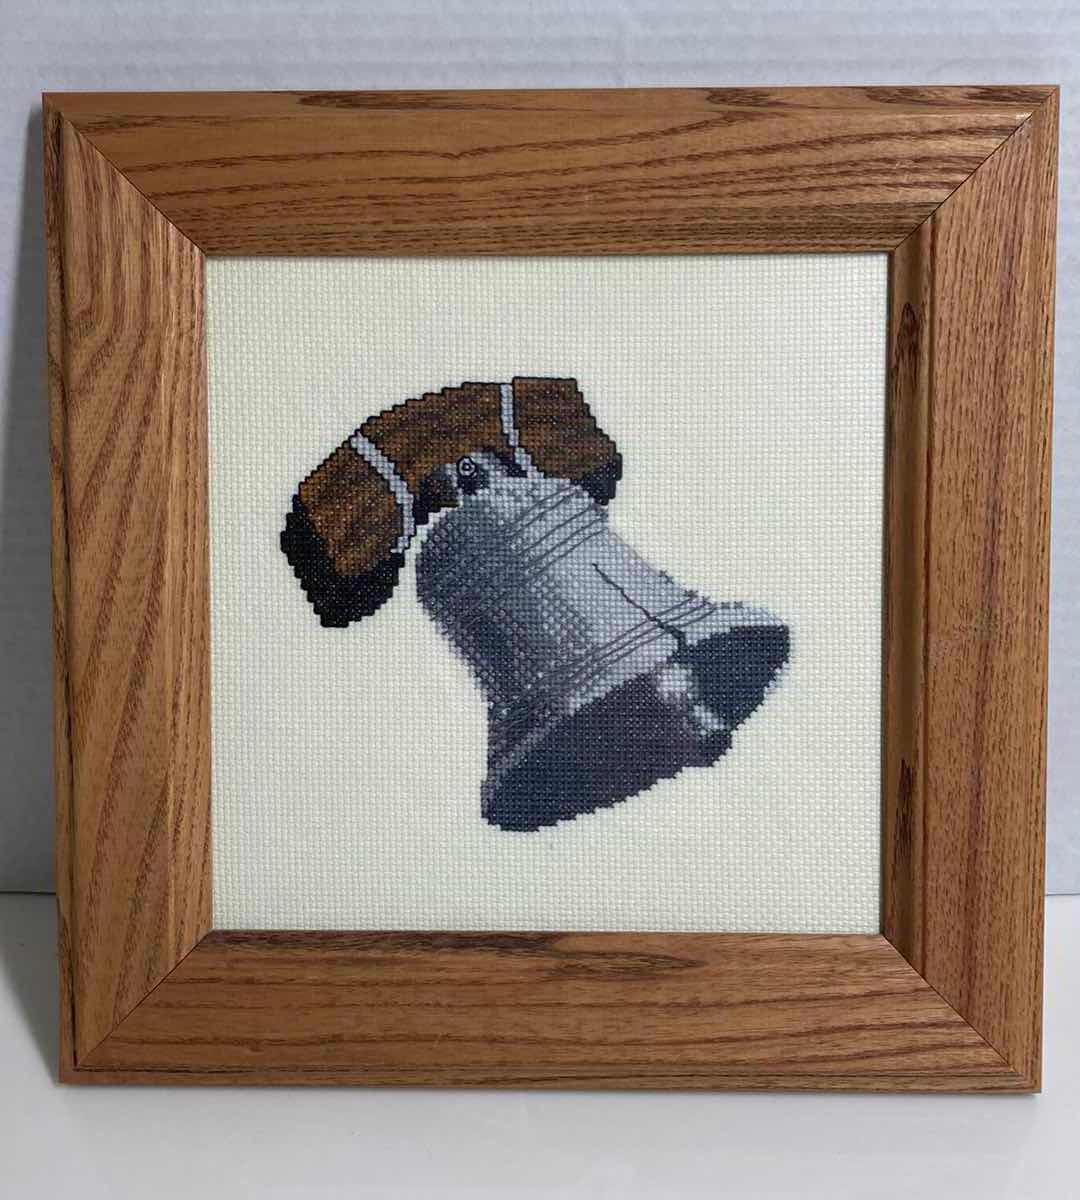 Photo 1 of LIBERTY BELL EMBROIDERY CROSS STITCH FRAMED ARTWORK BY LOCAL ARTIST 2002 11” X 11”